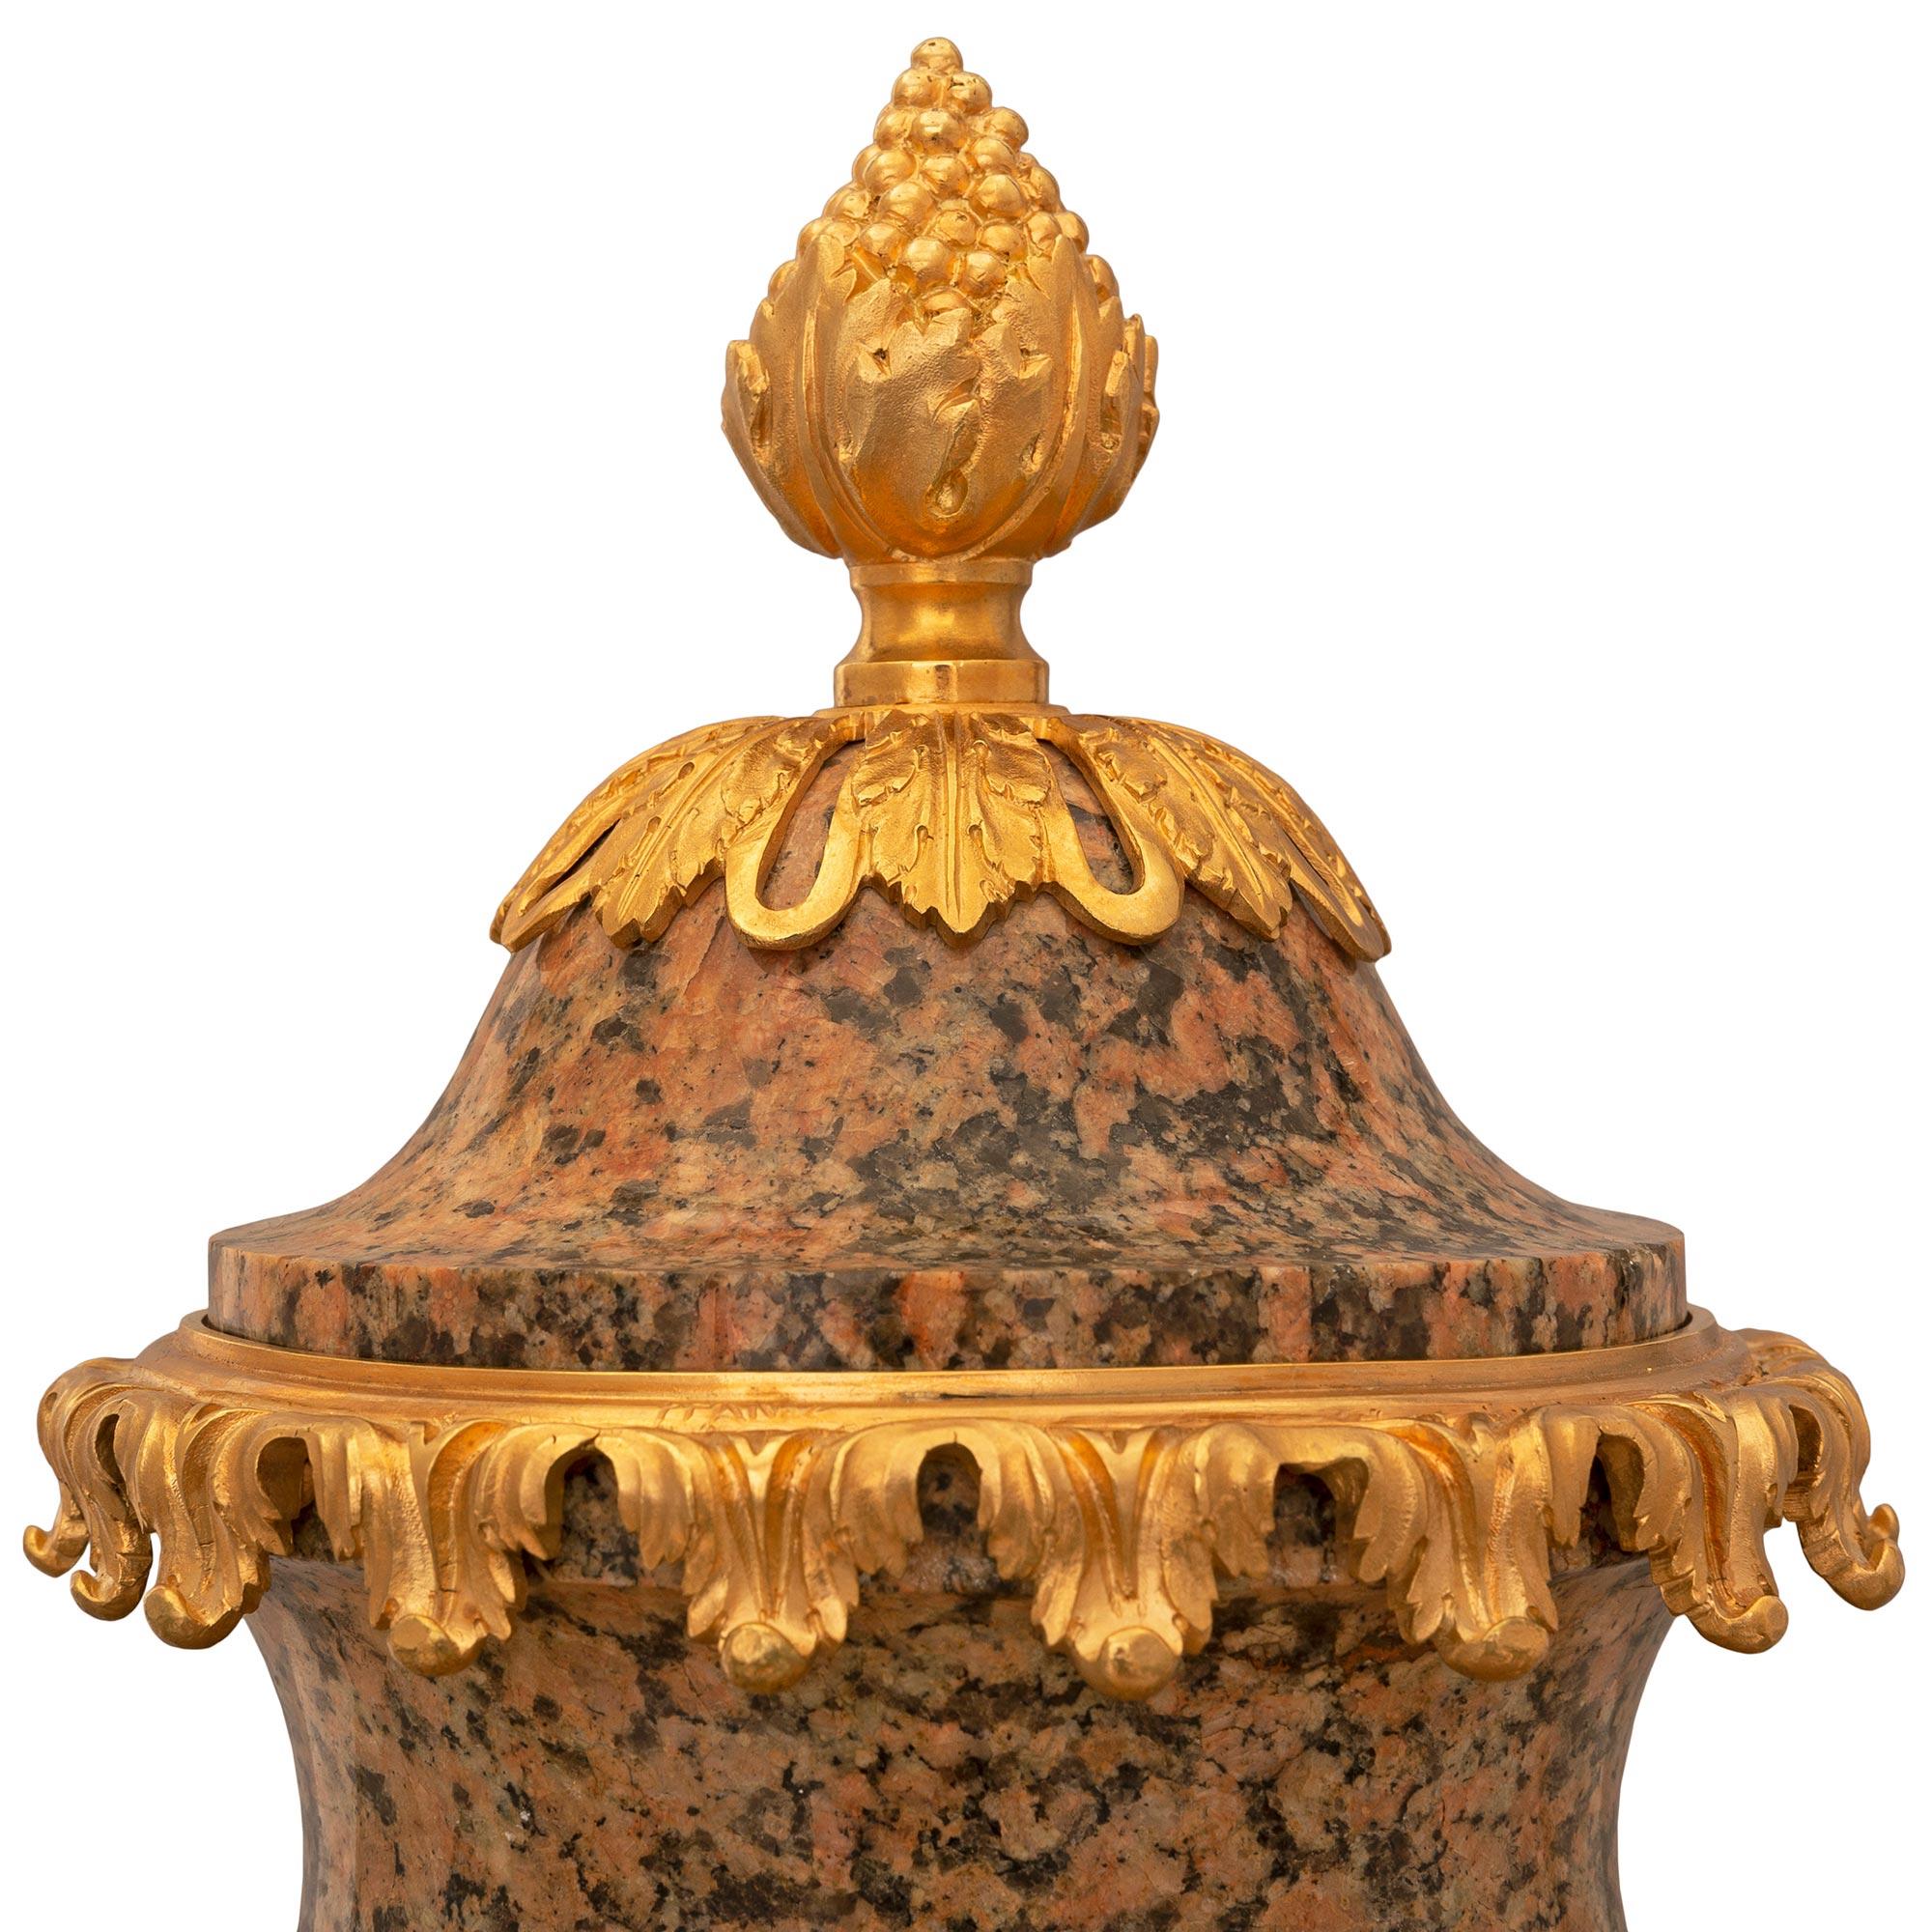 Pair of 19th Century Louis XVI Style Granite and Ormolu-Mounted Lidded Urns In Good Condition For Sale In West Palm Beach, FL